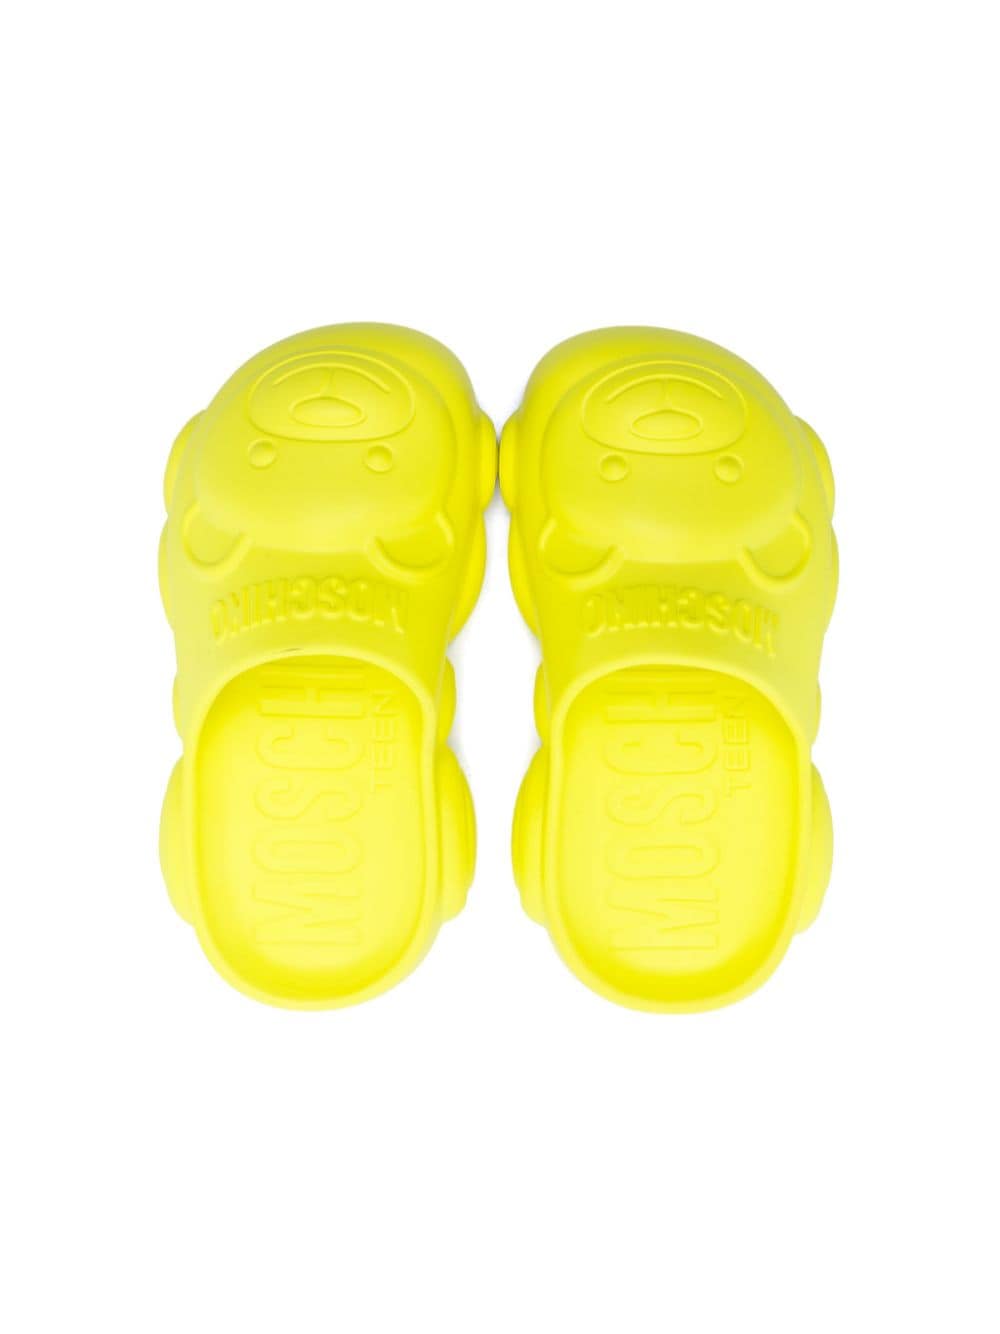 Chaussons fille jaune fluo